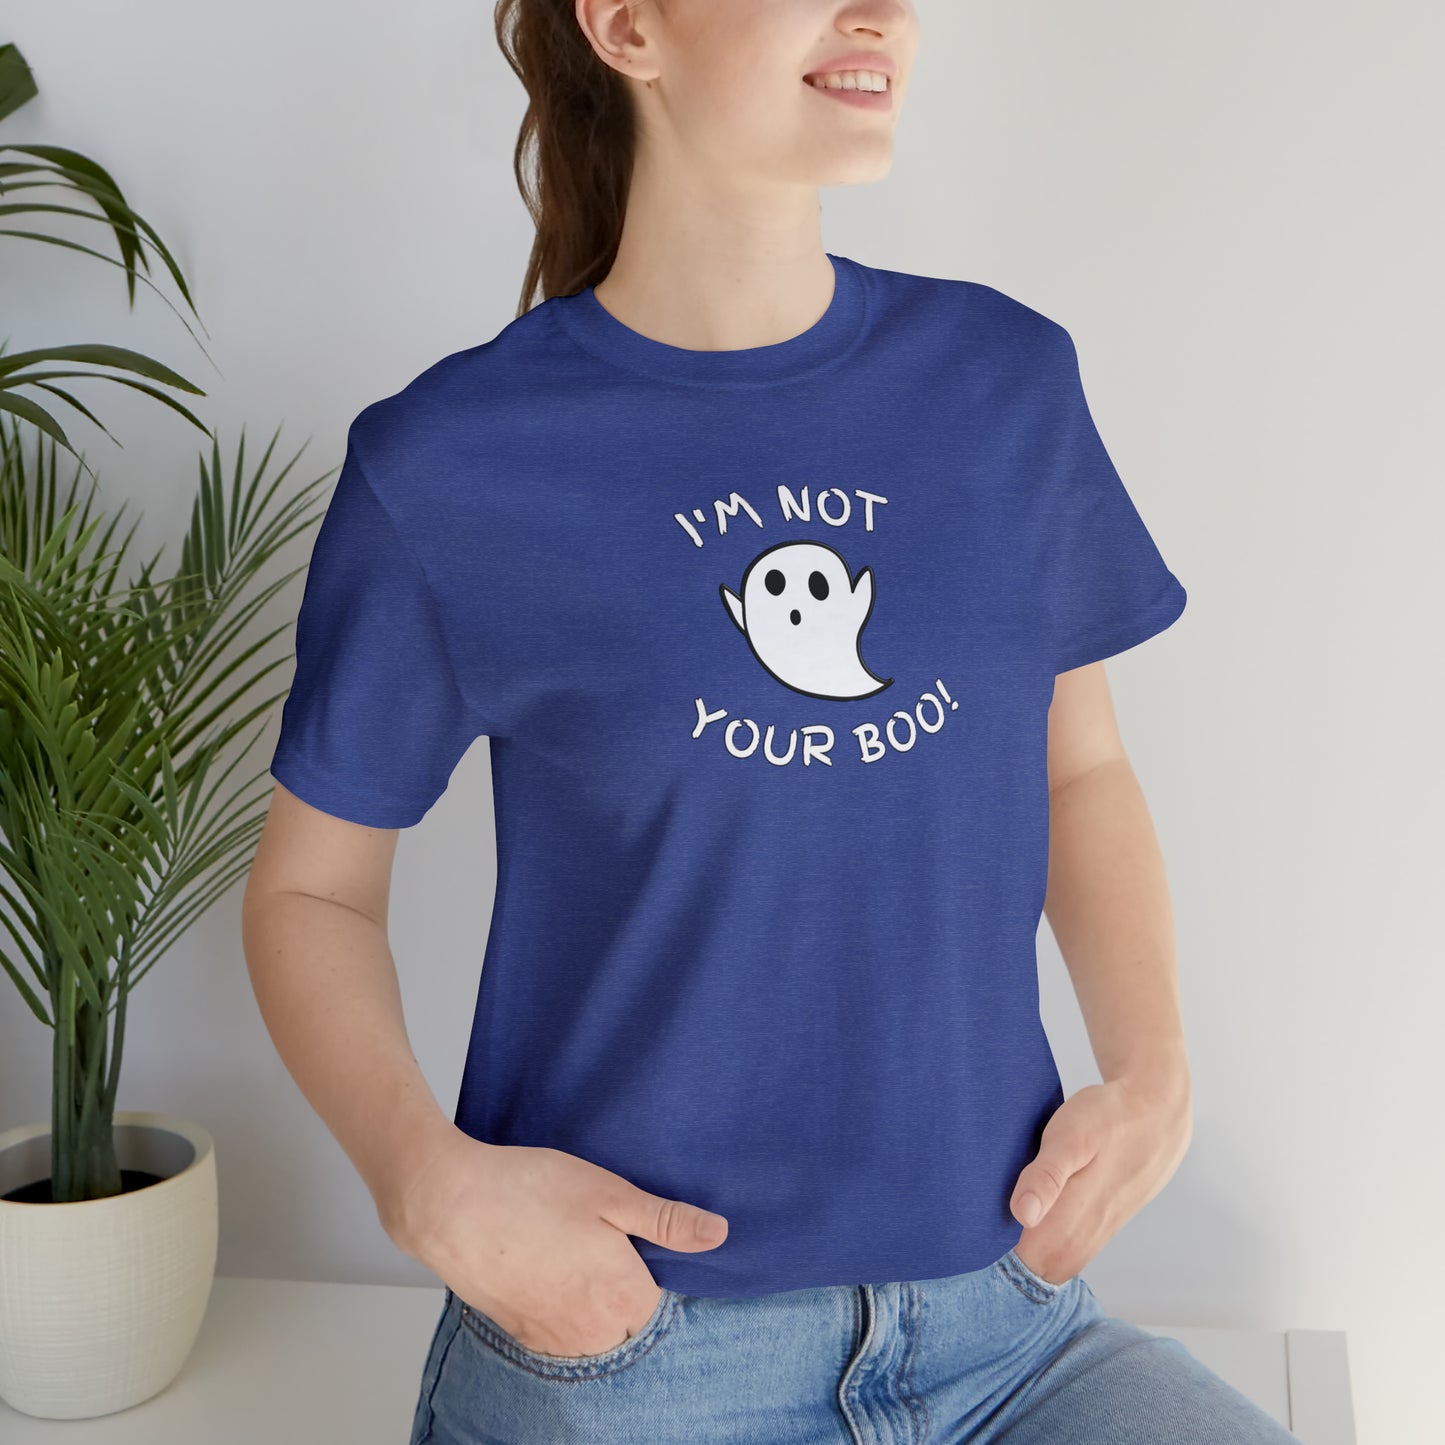 Aesthetic "Not Your Boo" T-shirt, Funny Halloween tee, Sassy and Funny Fall top, Girl Power Autumn Tee, Gift for her, Halloween costume tee